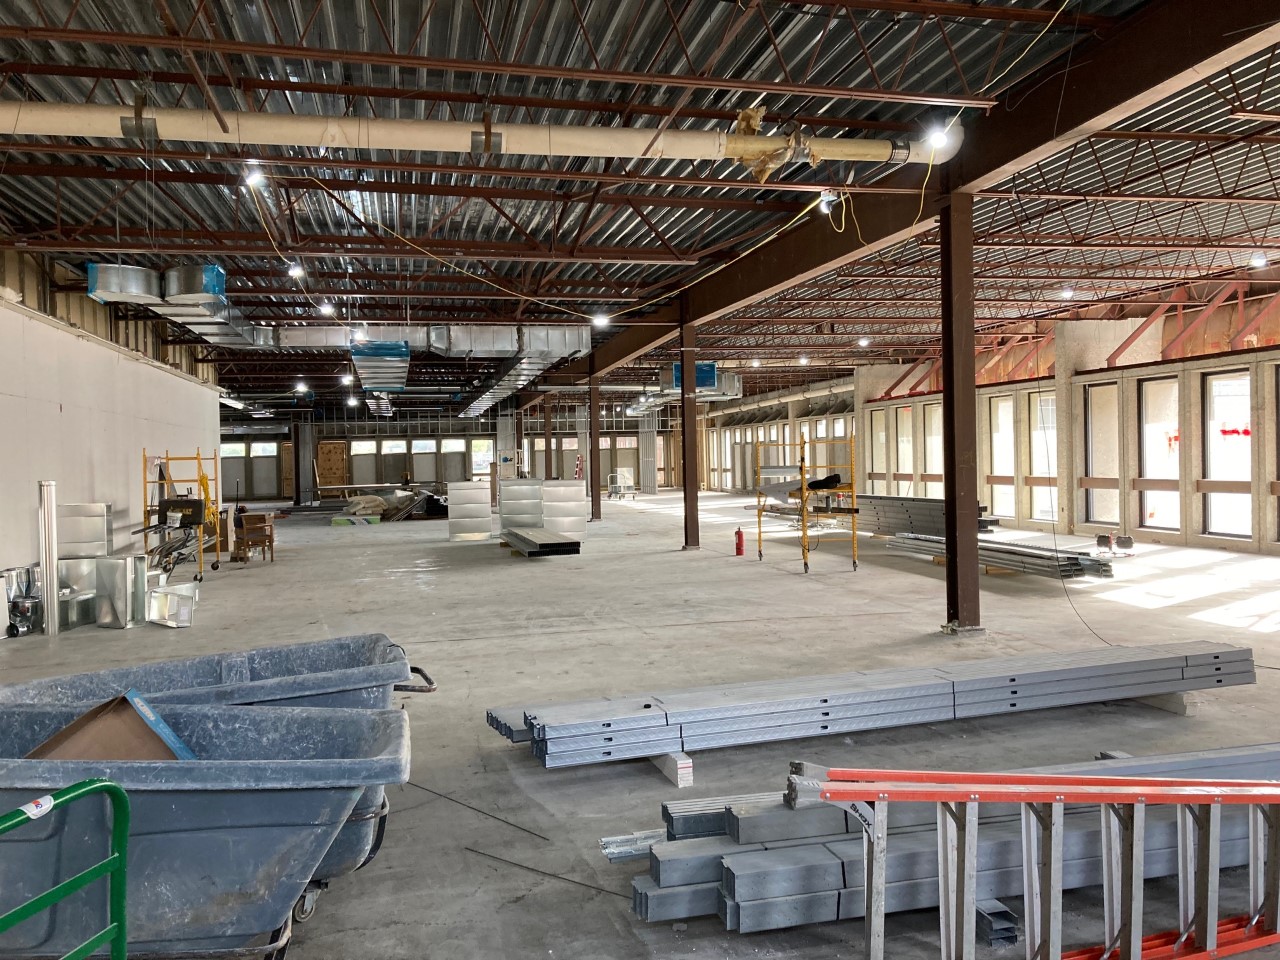 Interior view of construction in the Adult services area